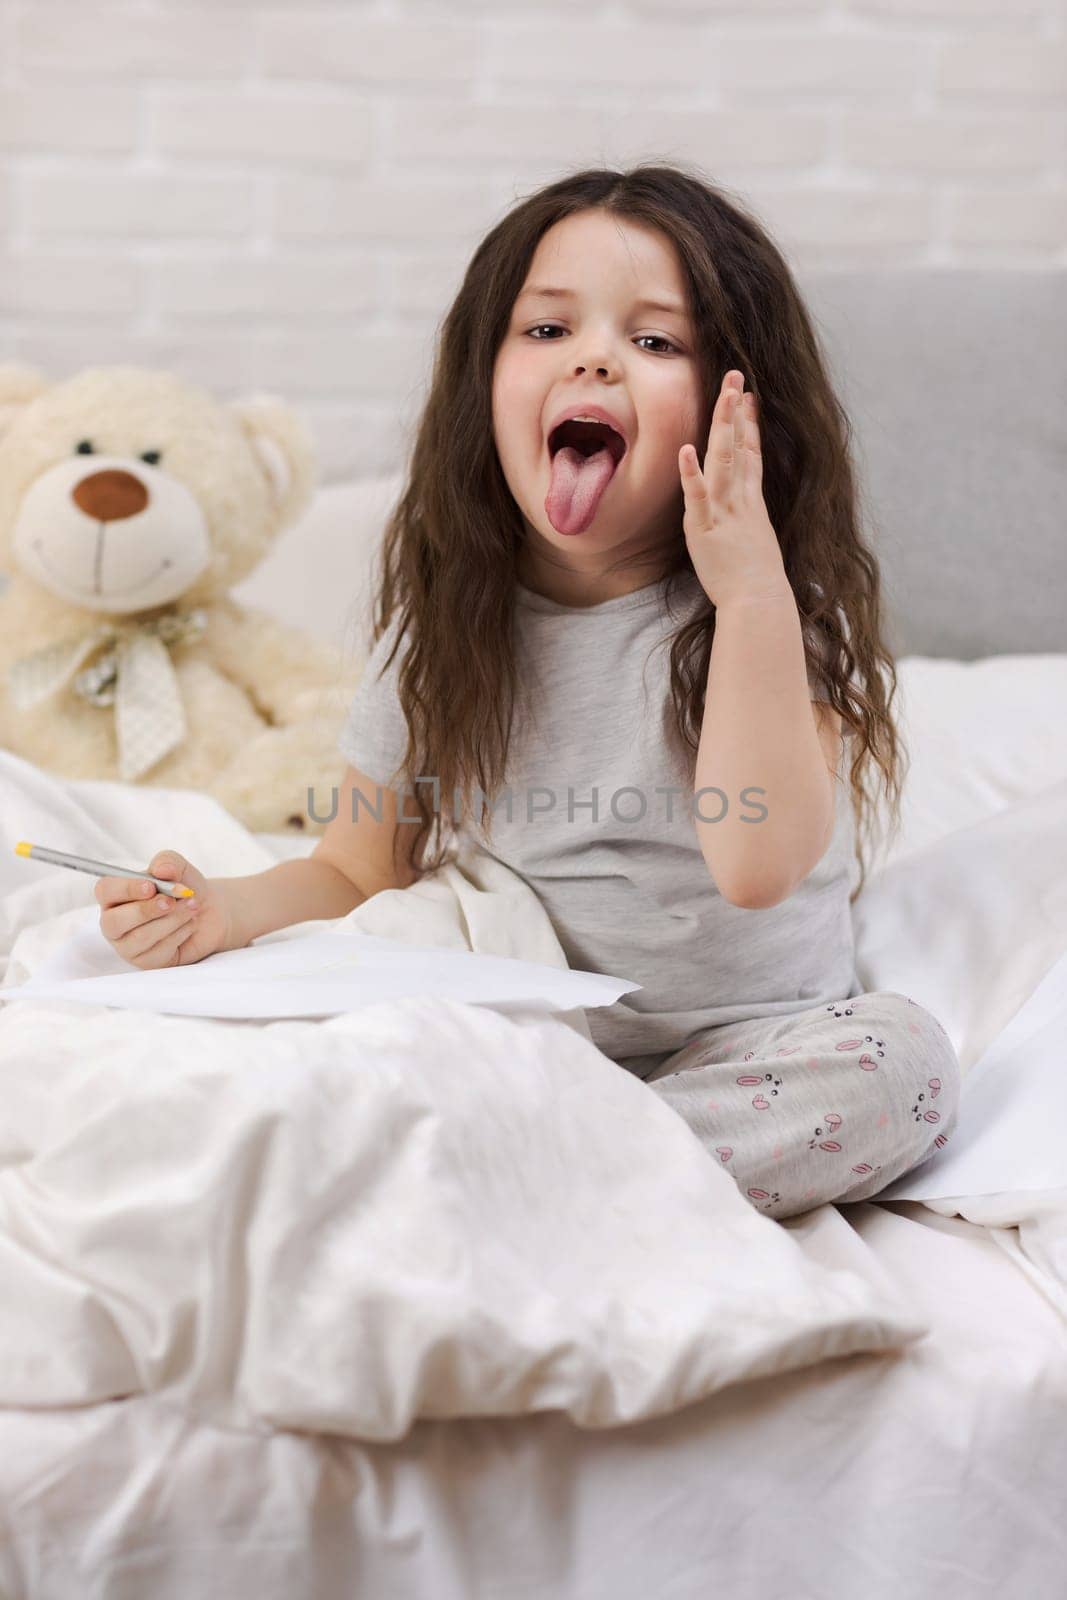 cute little girl drawing pictures while lying on bed. Kid fooling around